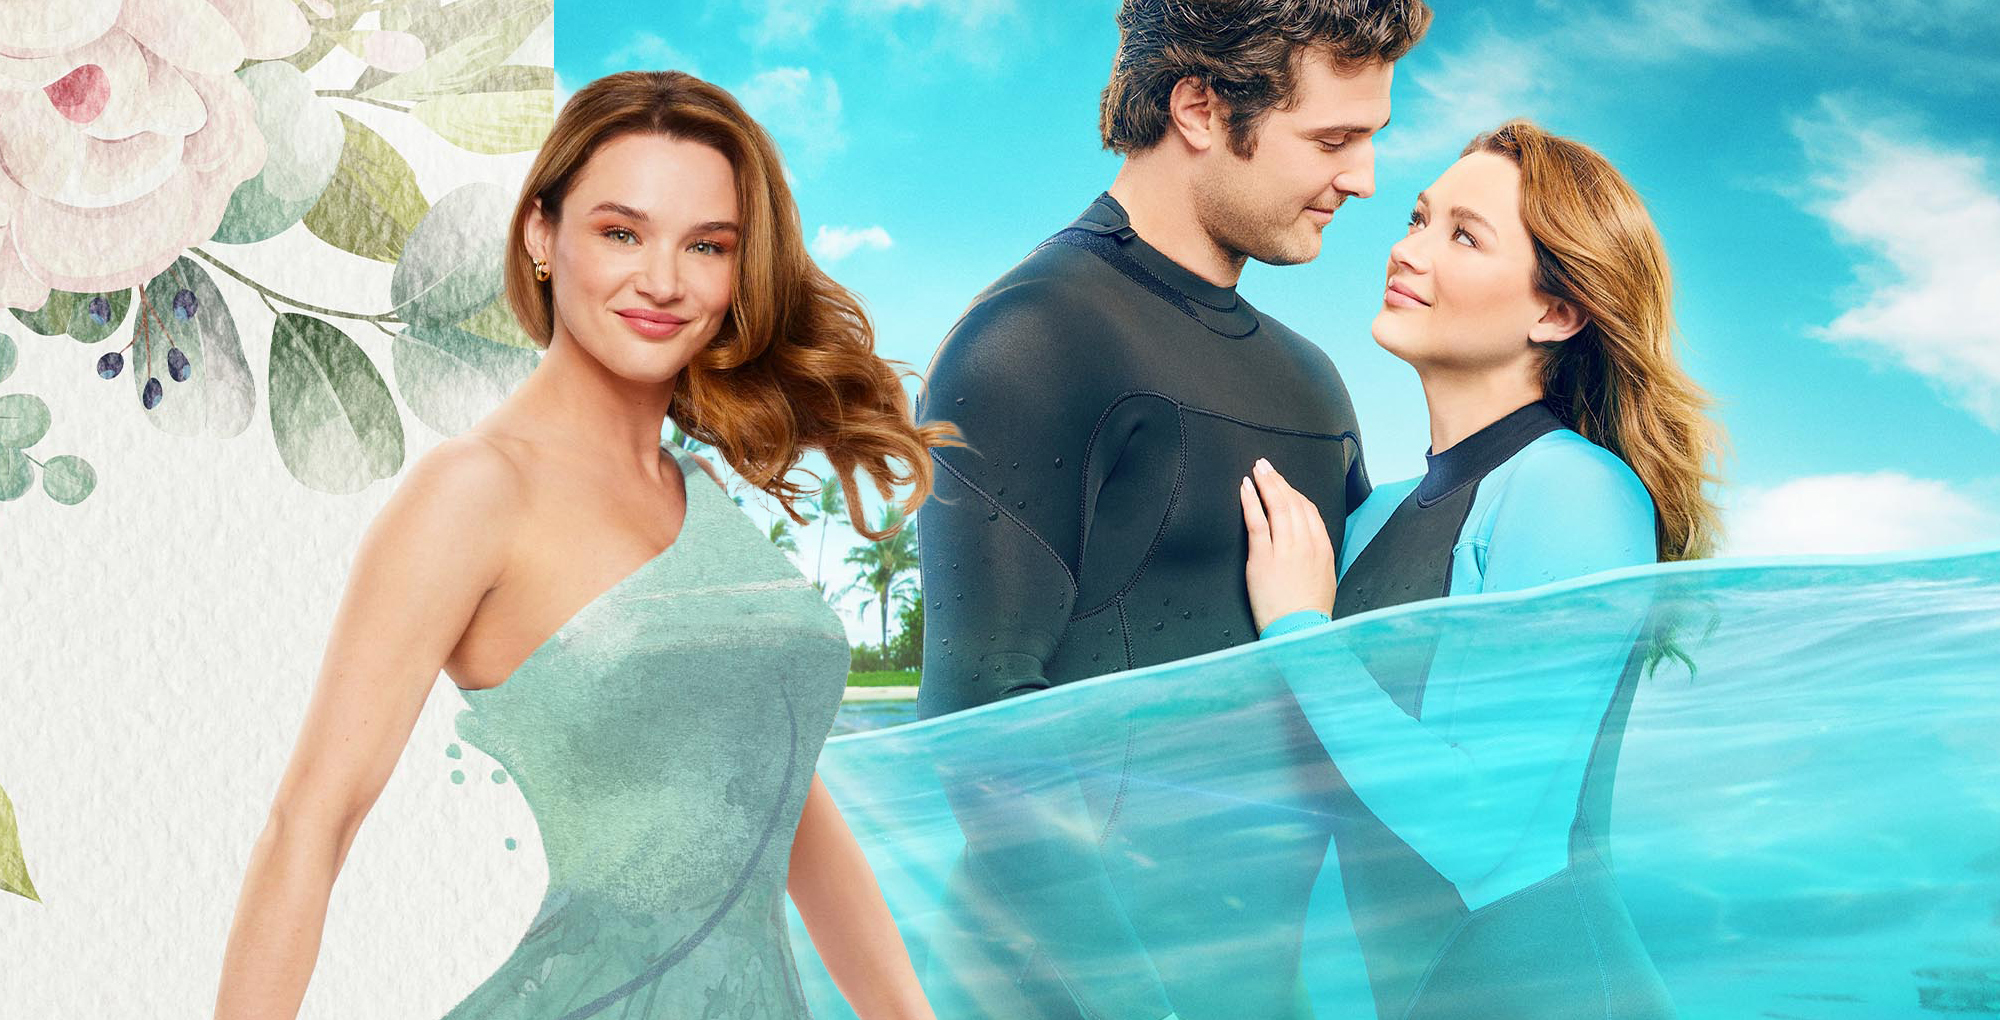 hunter king is in hallmark movies now.